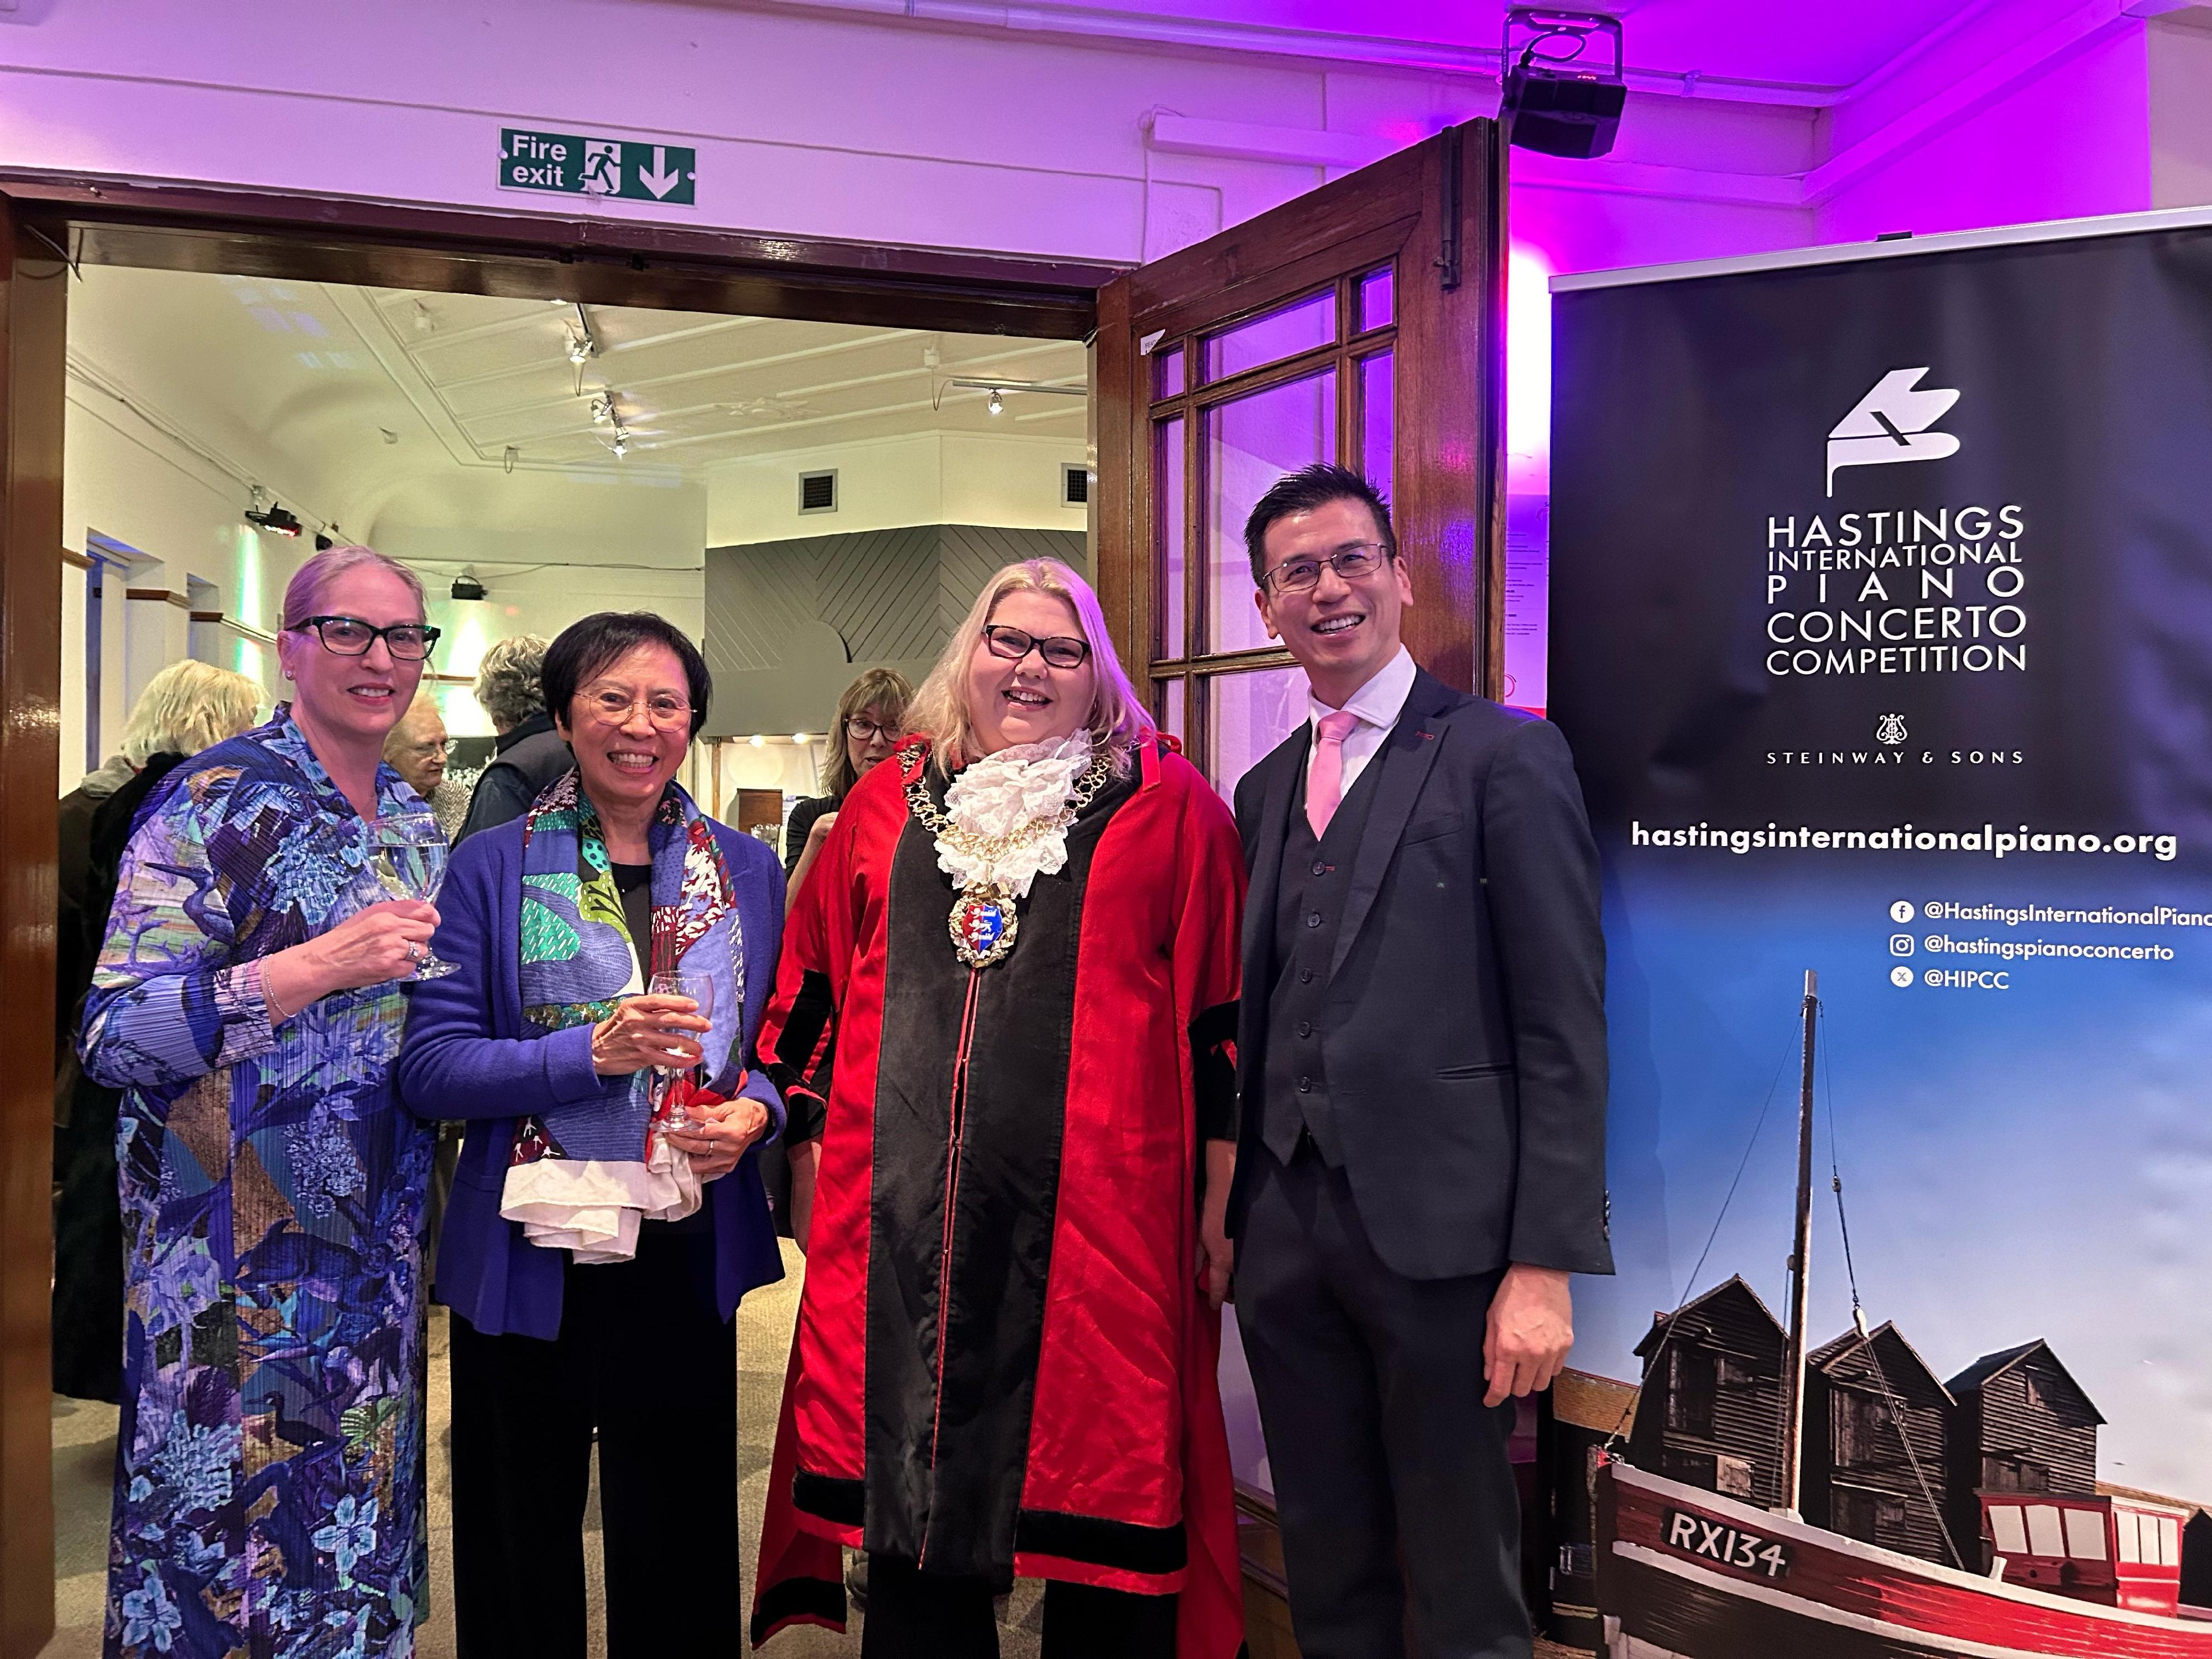 The Hong Kong Economic and Trade Office, London (London ETO) supports Hong Kong pianist and distinguished educator Professor Eleanor Wong's cultural exchange tour in the United Kingdom. Photo shows (from left) the Artistic Director and jury president of the Hastings International Piano Concerto Competition, Professor Vanessa Latarche; Professor Eleanor Wong; the Mayor of Hastings, Councillor Margi O'Callaghan; and the Director of the London ETO, Mr Gilford Law at the evening reception.
